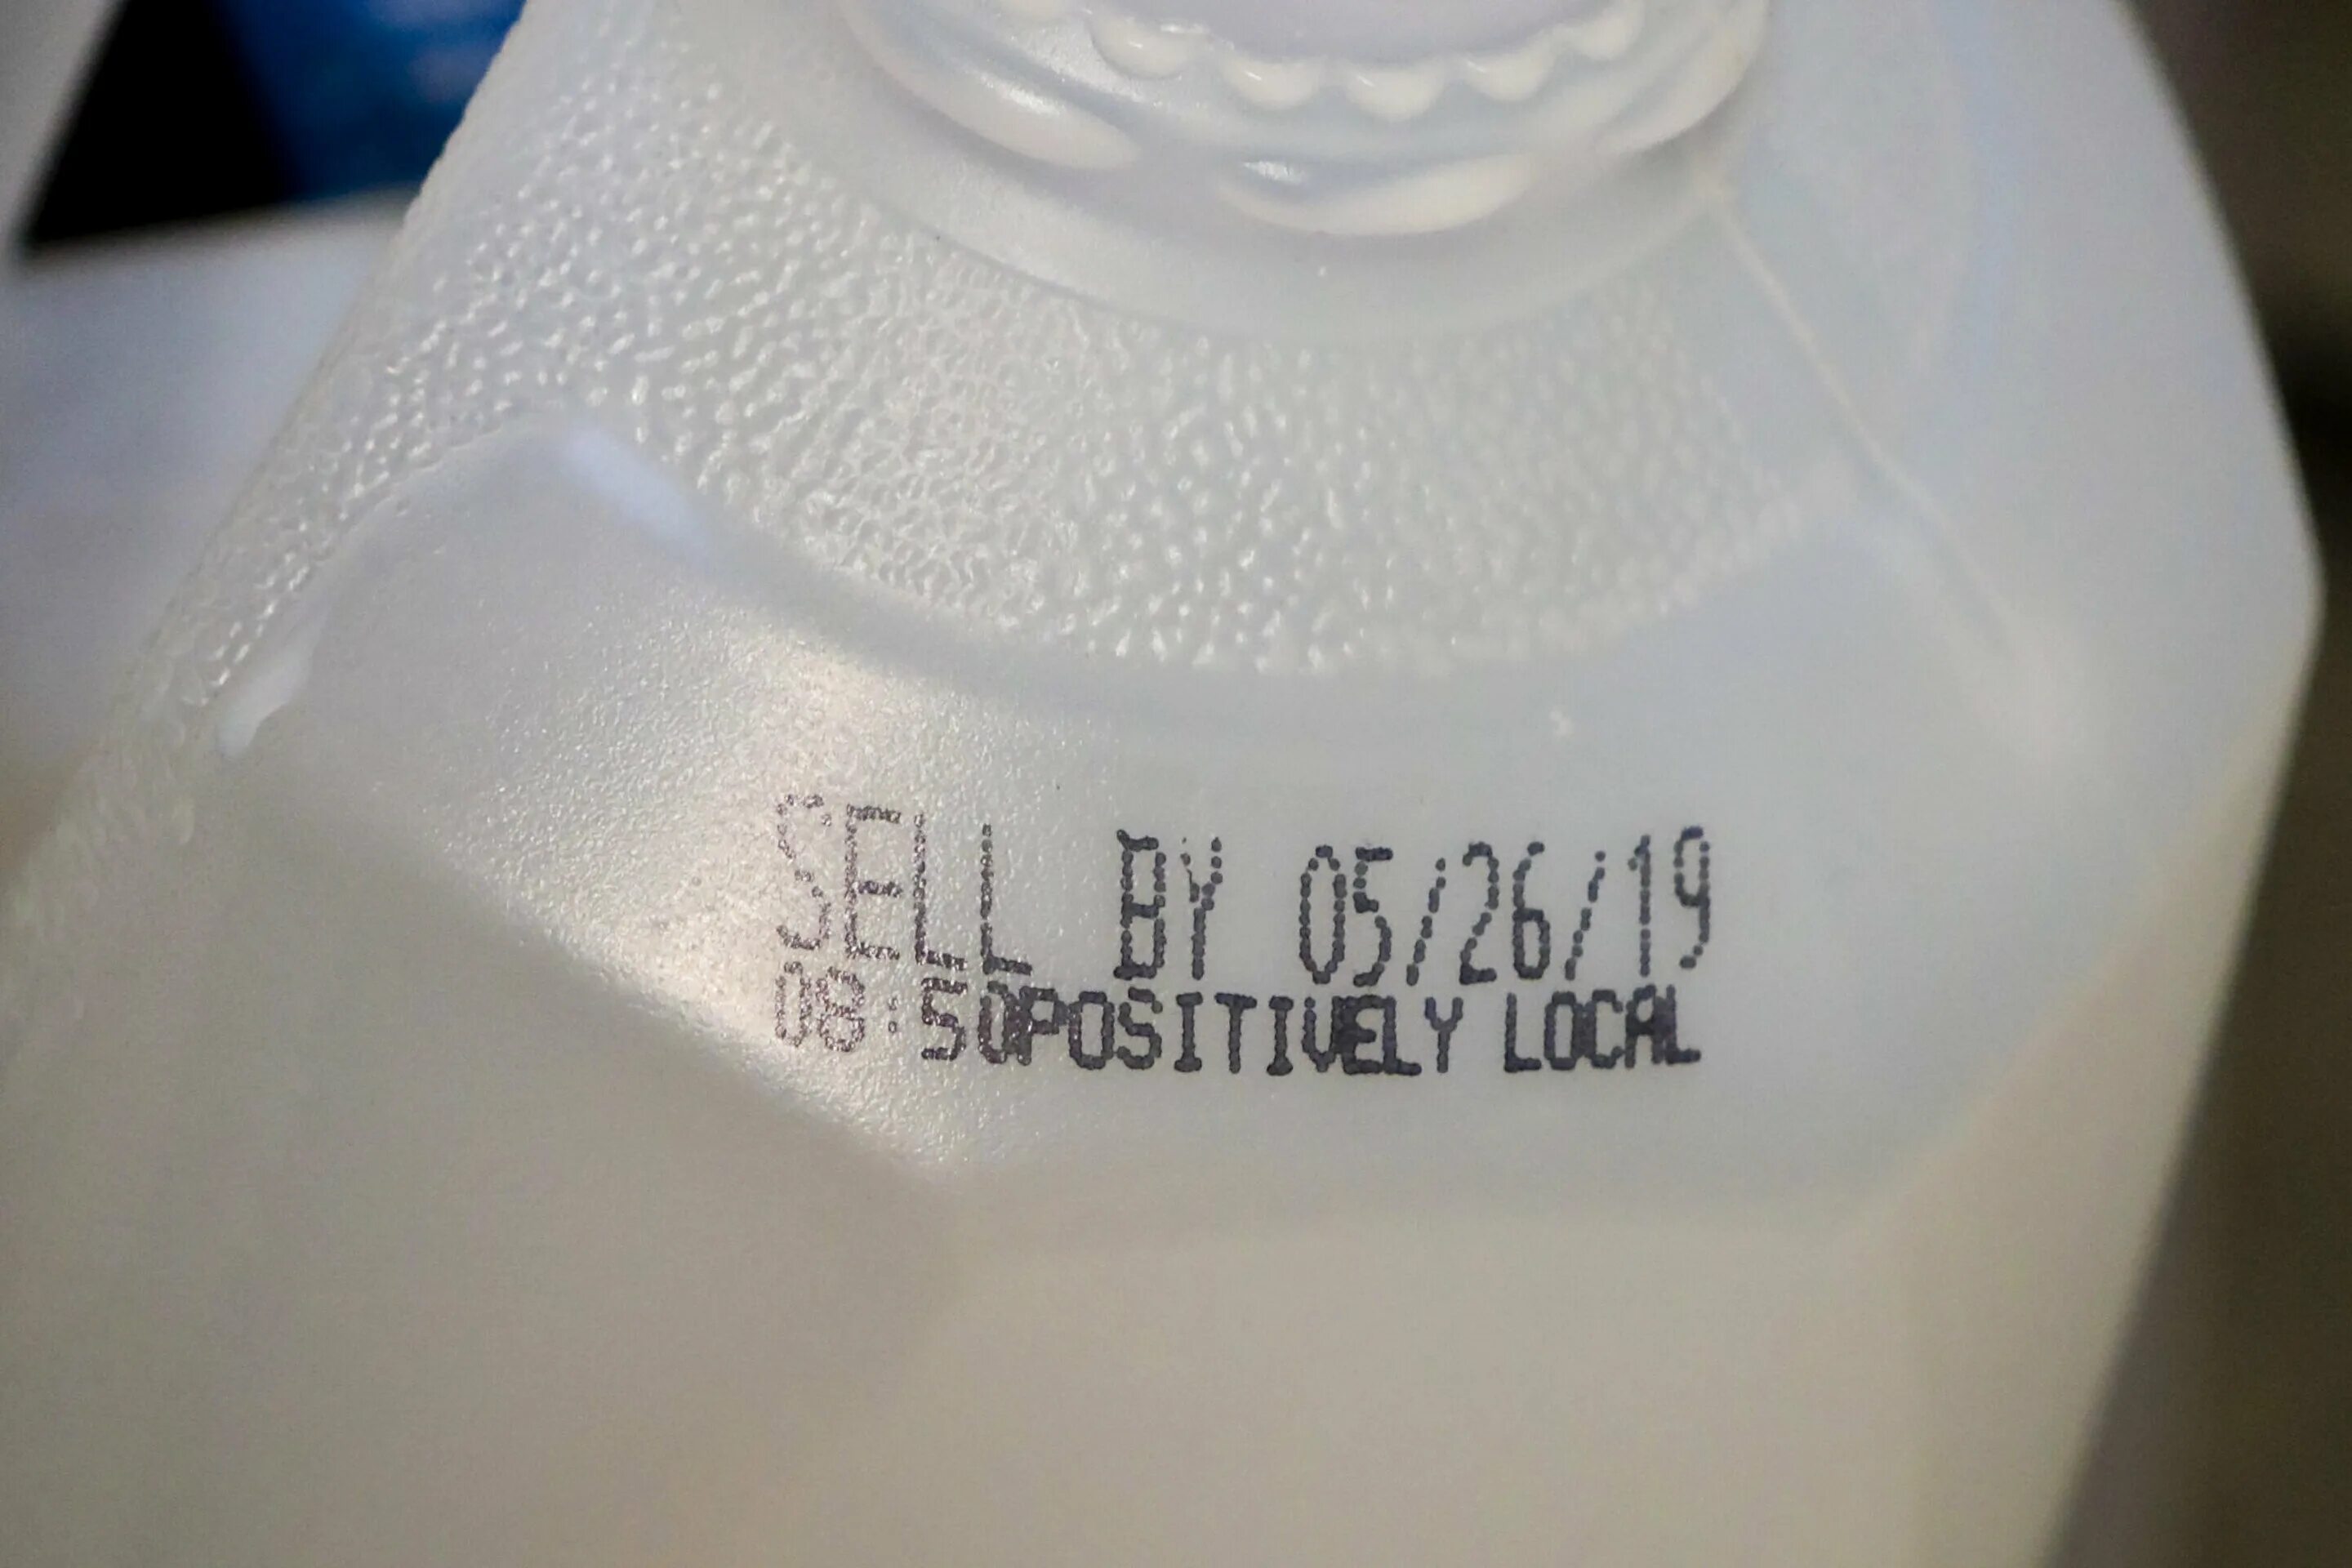 They sell milk in this. Sell-by Date. Sell by Date picture. Label expiration Date. Made in на продуктах.